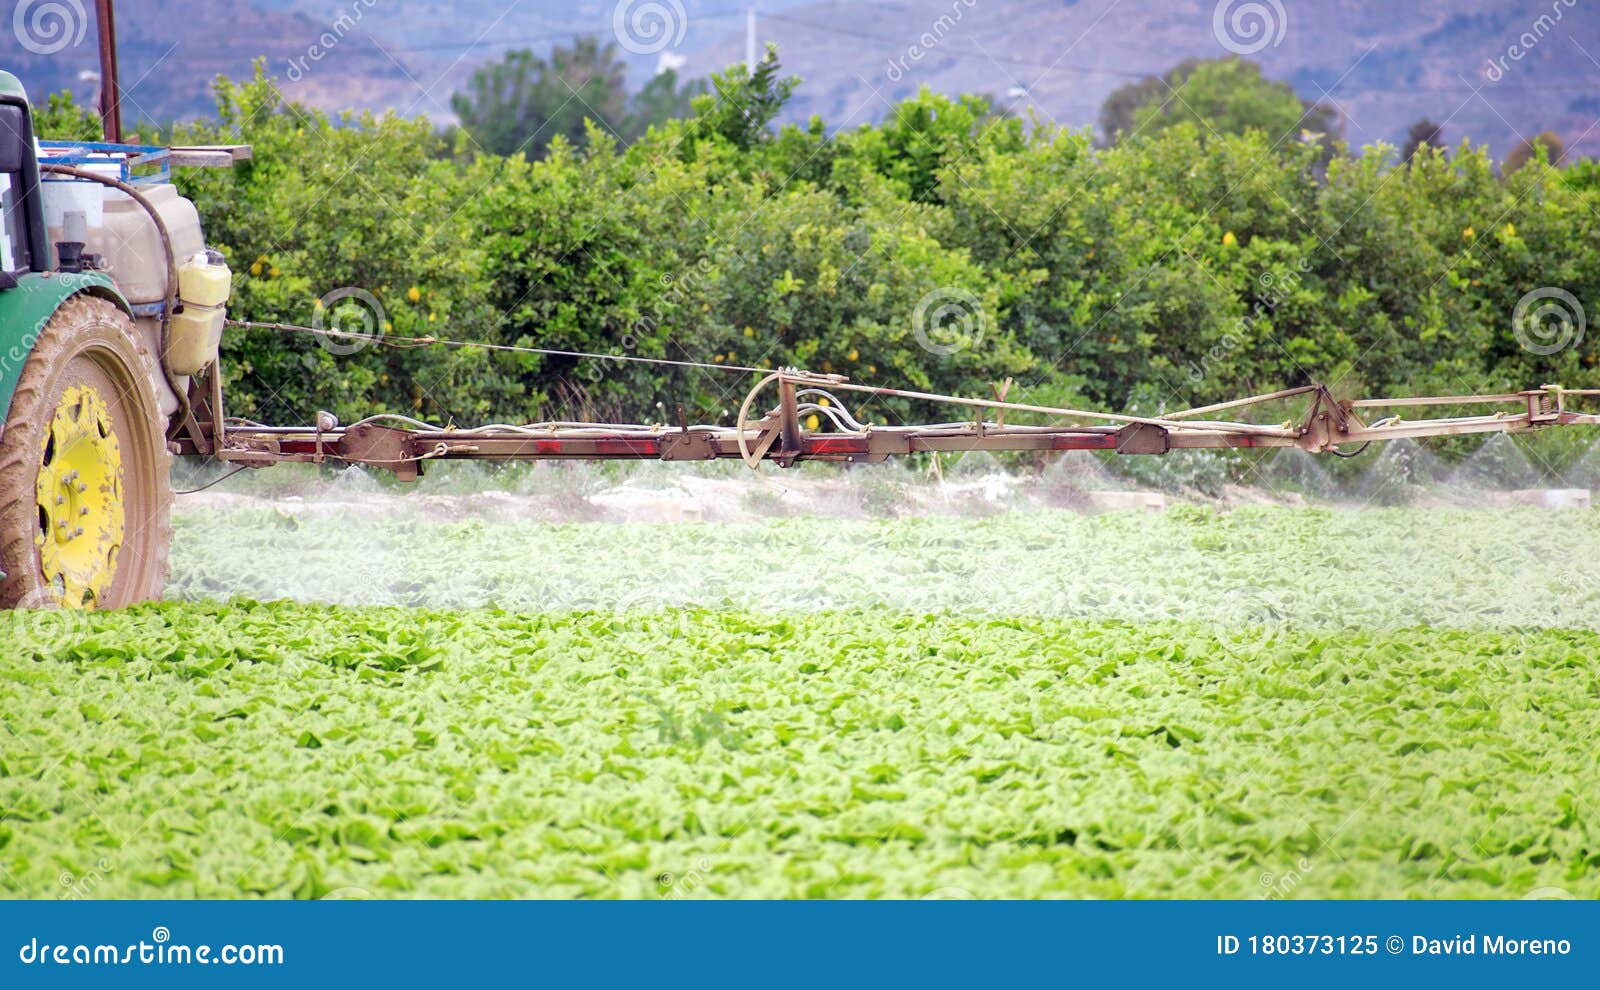 Tractor Spraying Pesticide Pesticides Or Insecticide Spray On Lettuce 